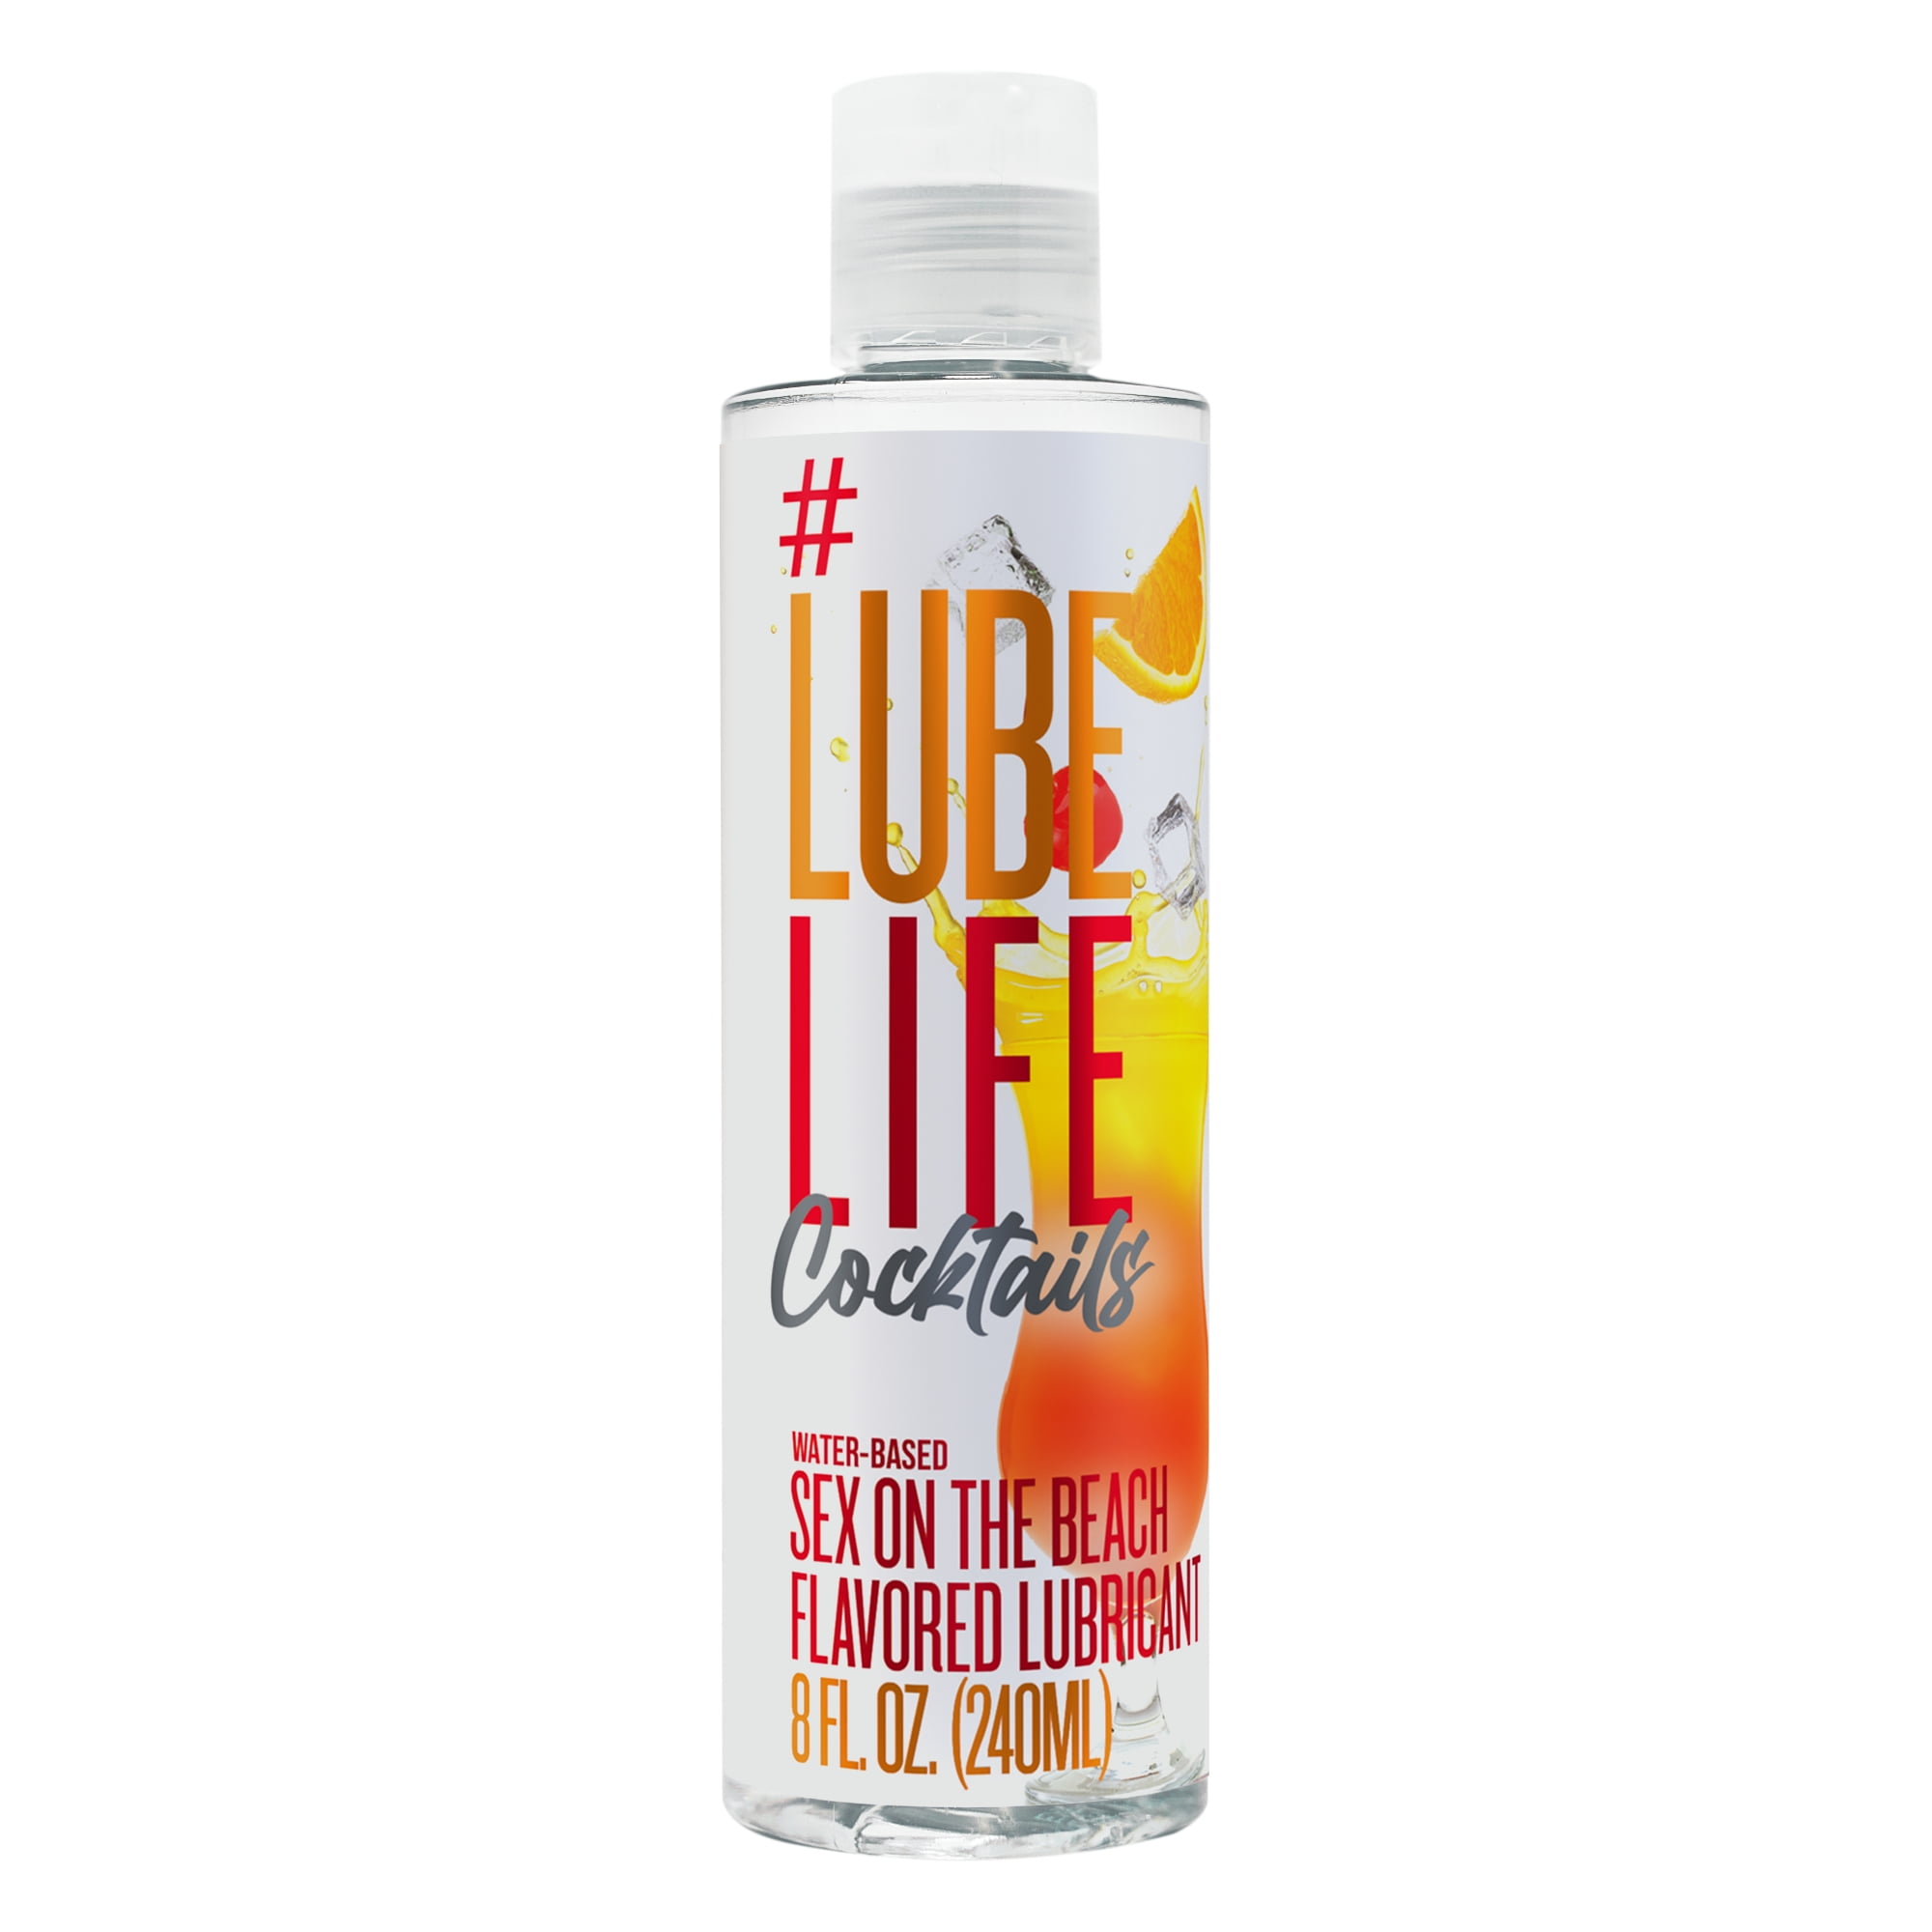 Lube Life Water Based Strawberry Flavored Personal Lubricant, Oral Sex Lube  8 0z - Helia Beer Co